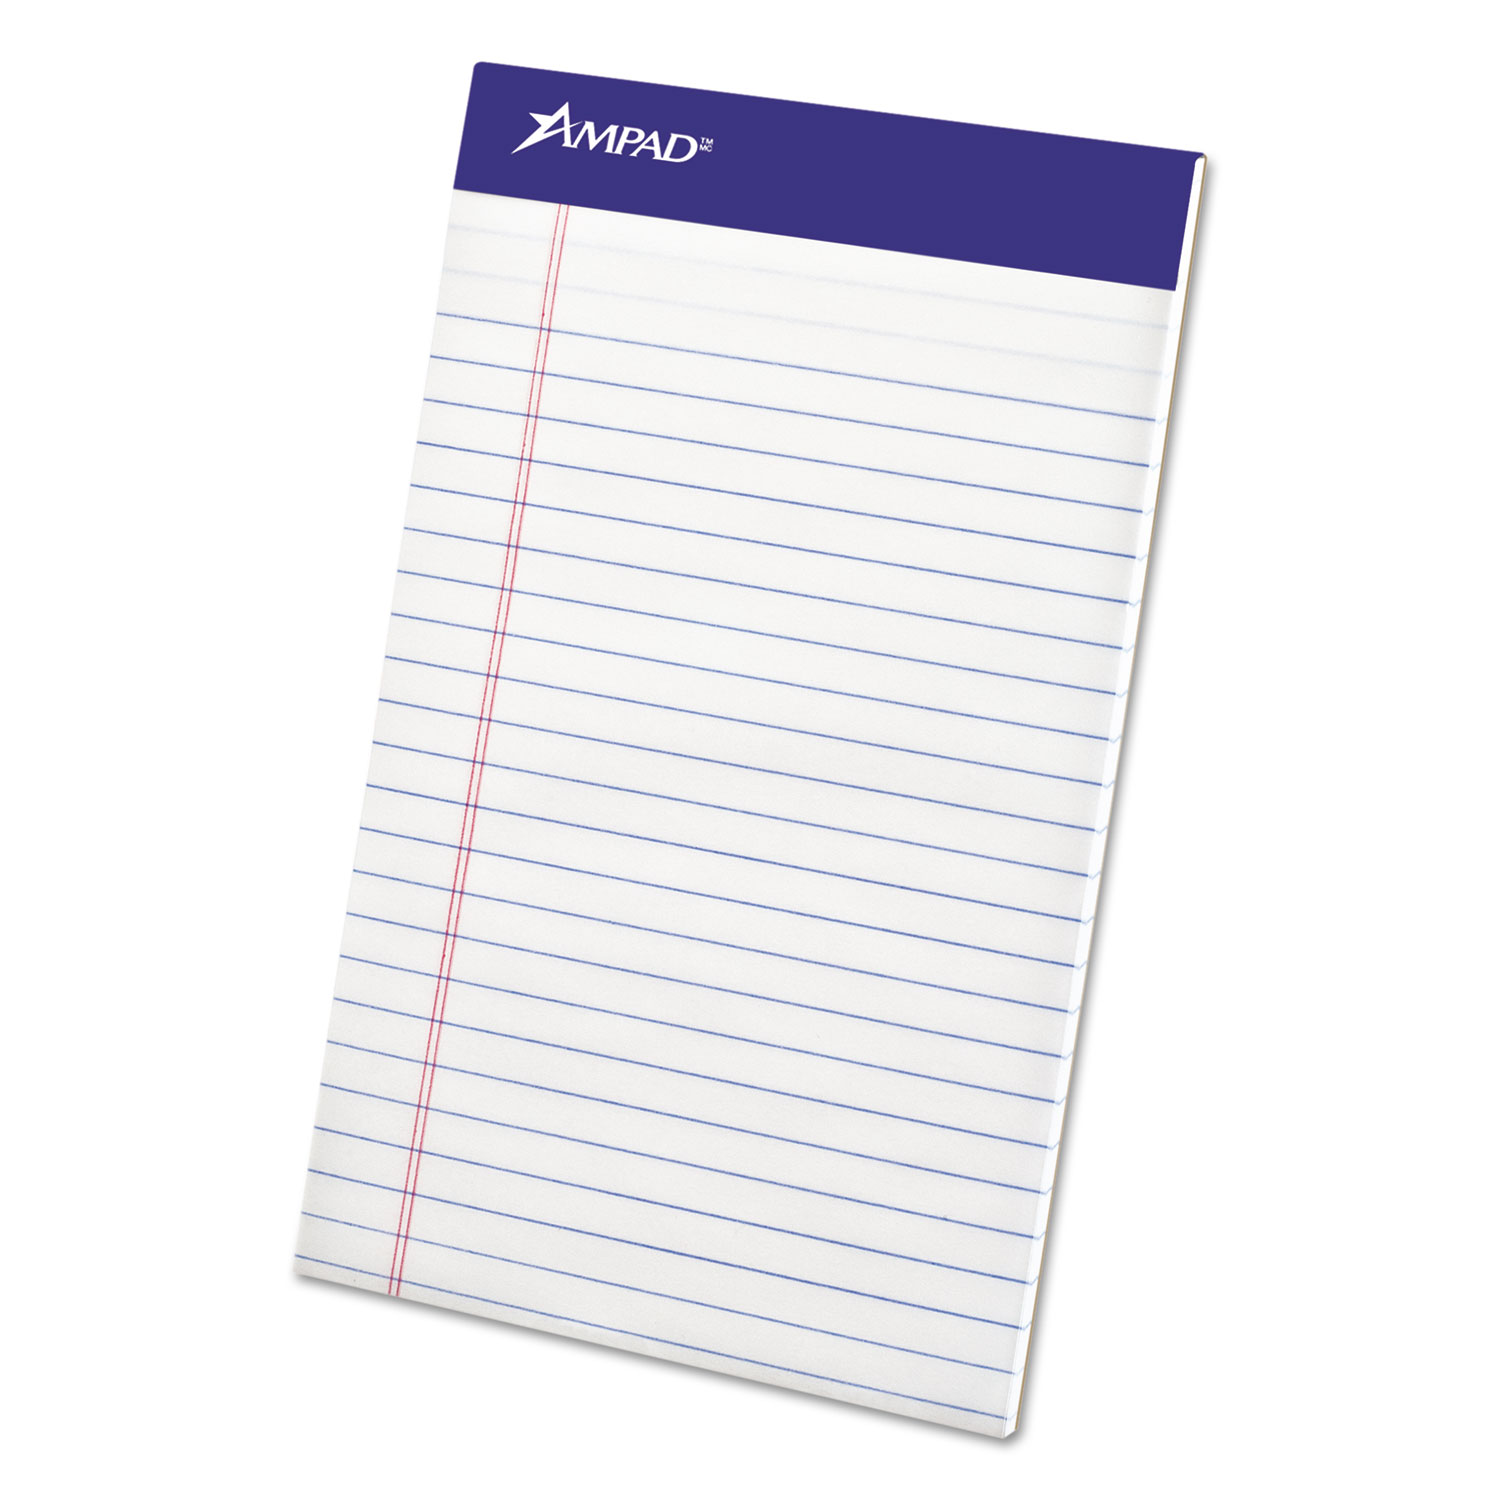  Ampad 20-304 Perforated Writing Pads, Narrow Rule, 5 x 8, White, 50 Sheets, Dozen (TOP20304) 